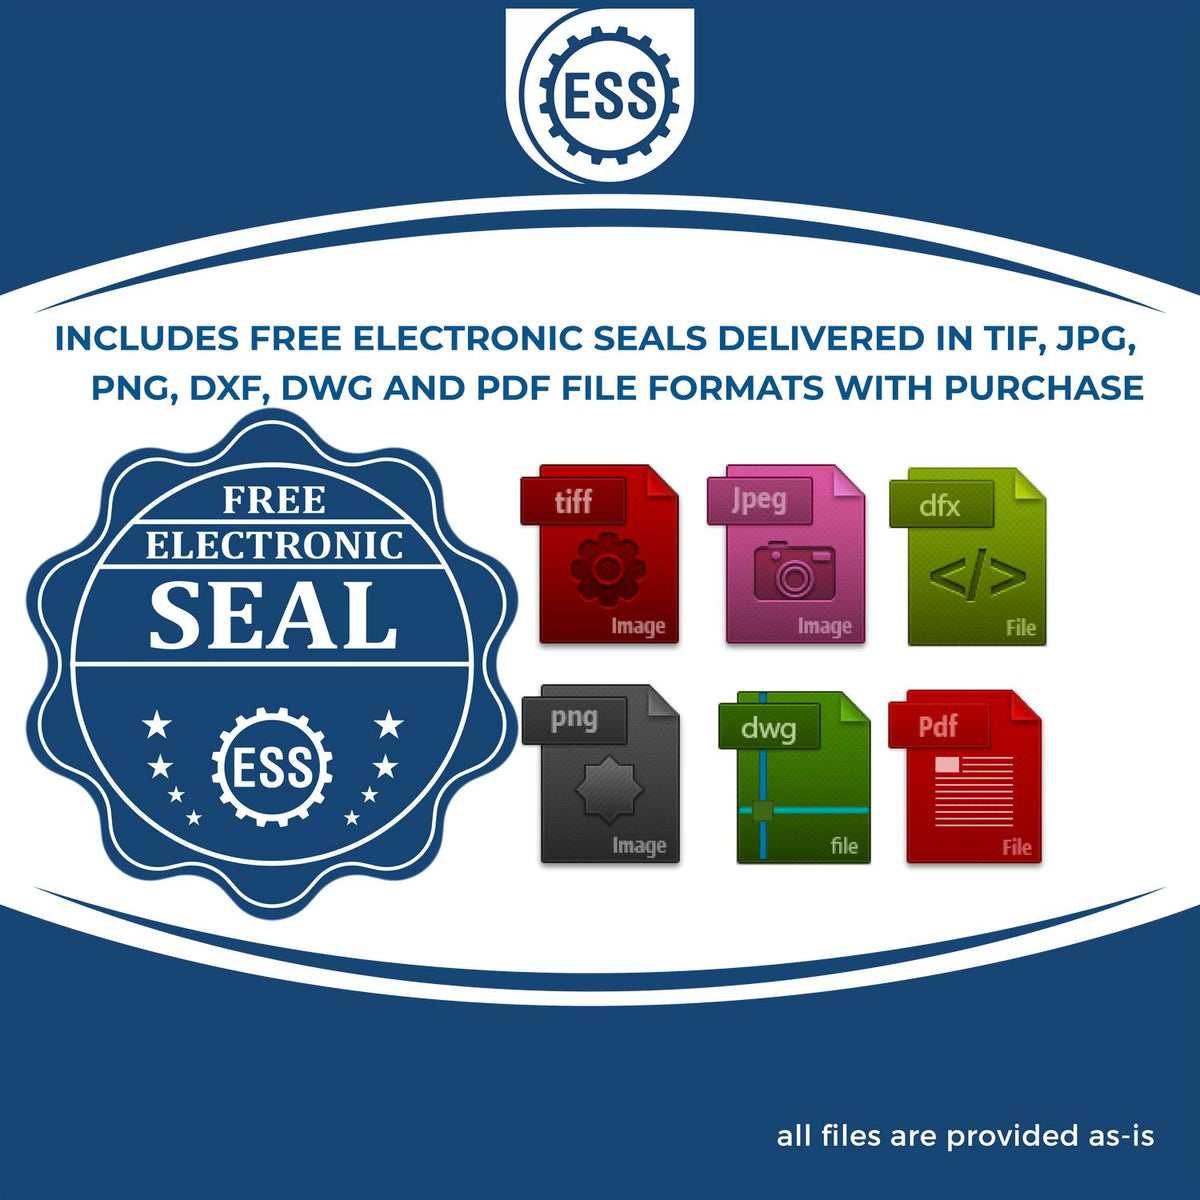 An infographic for the free electronic seal for the Delaware Professional Geologist Seal Stamp illustrating the different file type icons such as DXF, DWG, TIF, JPG and PNG.